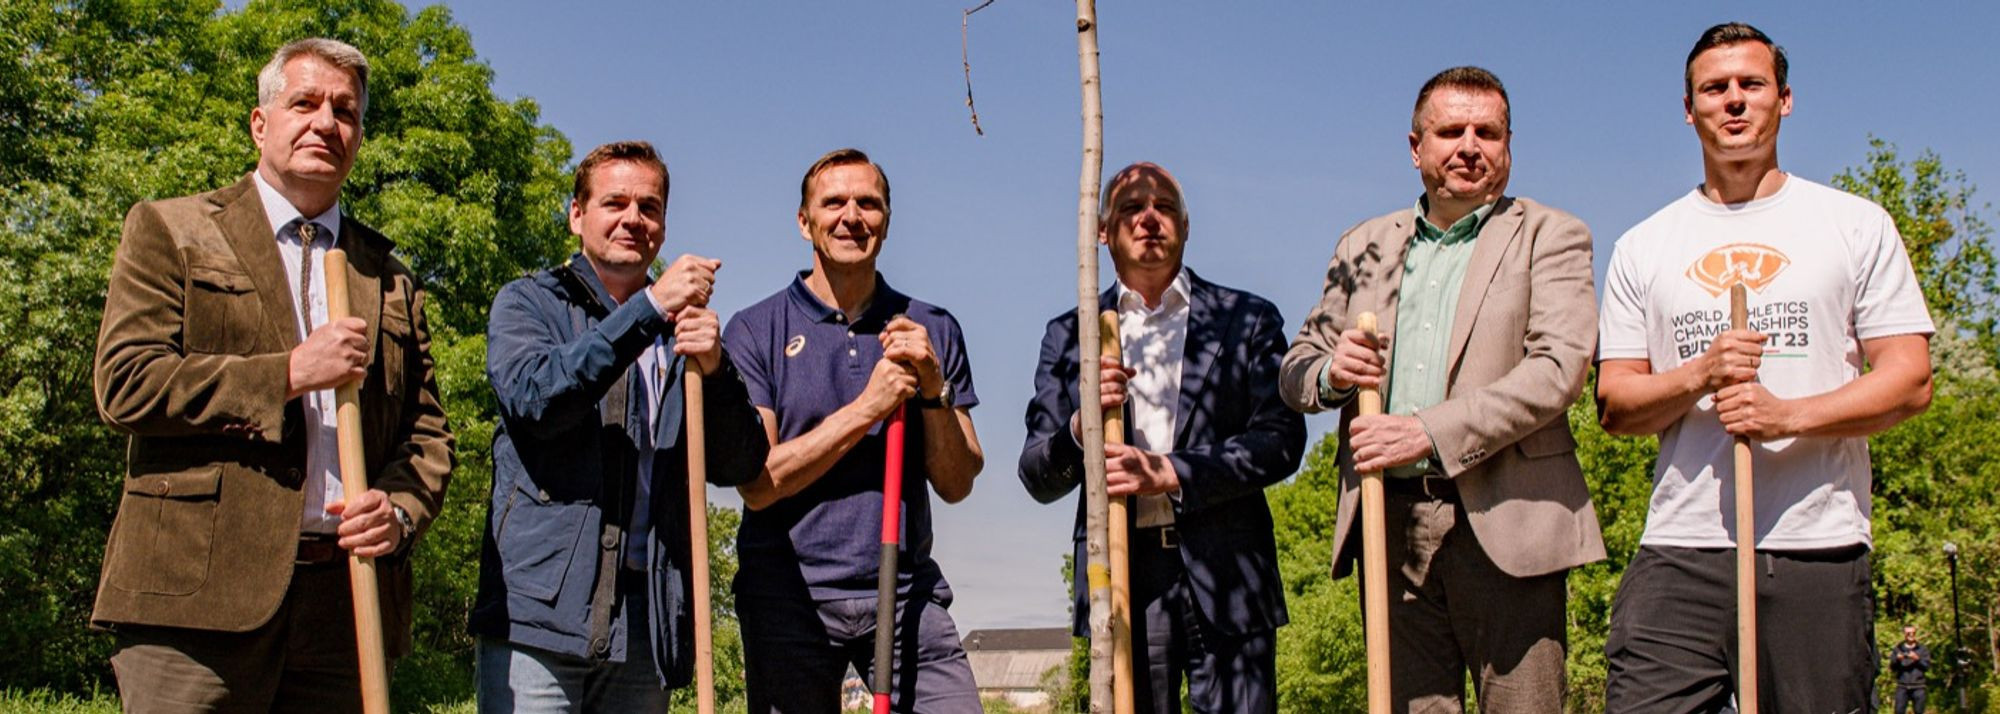 World Athletics Championships organisers plant 40 trees in Budapest as sustainability goals unveiled